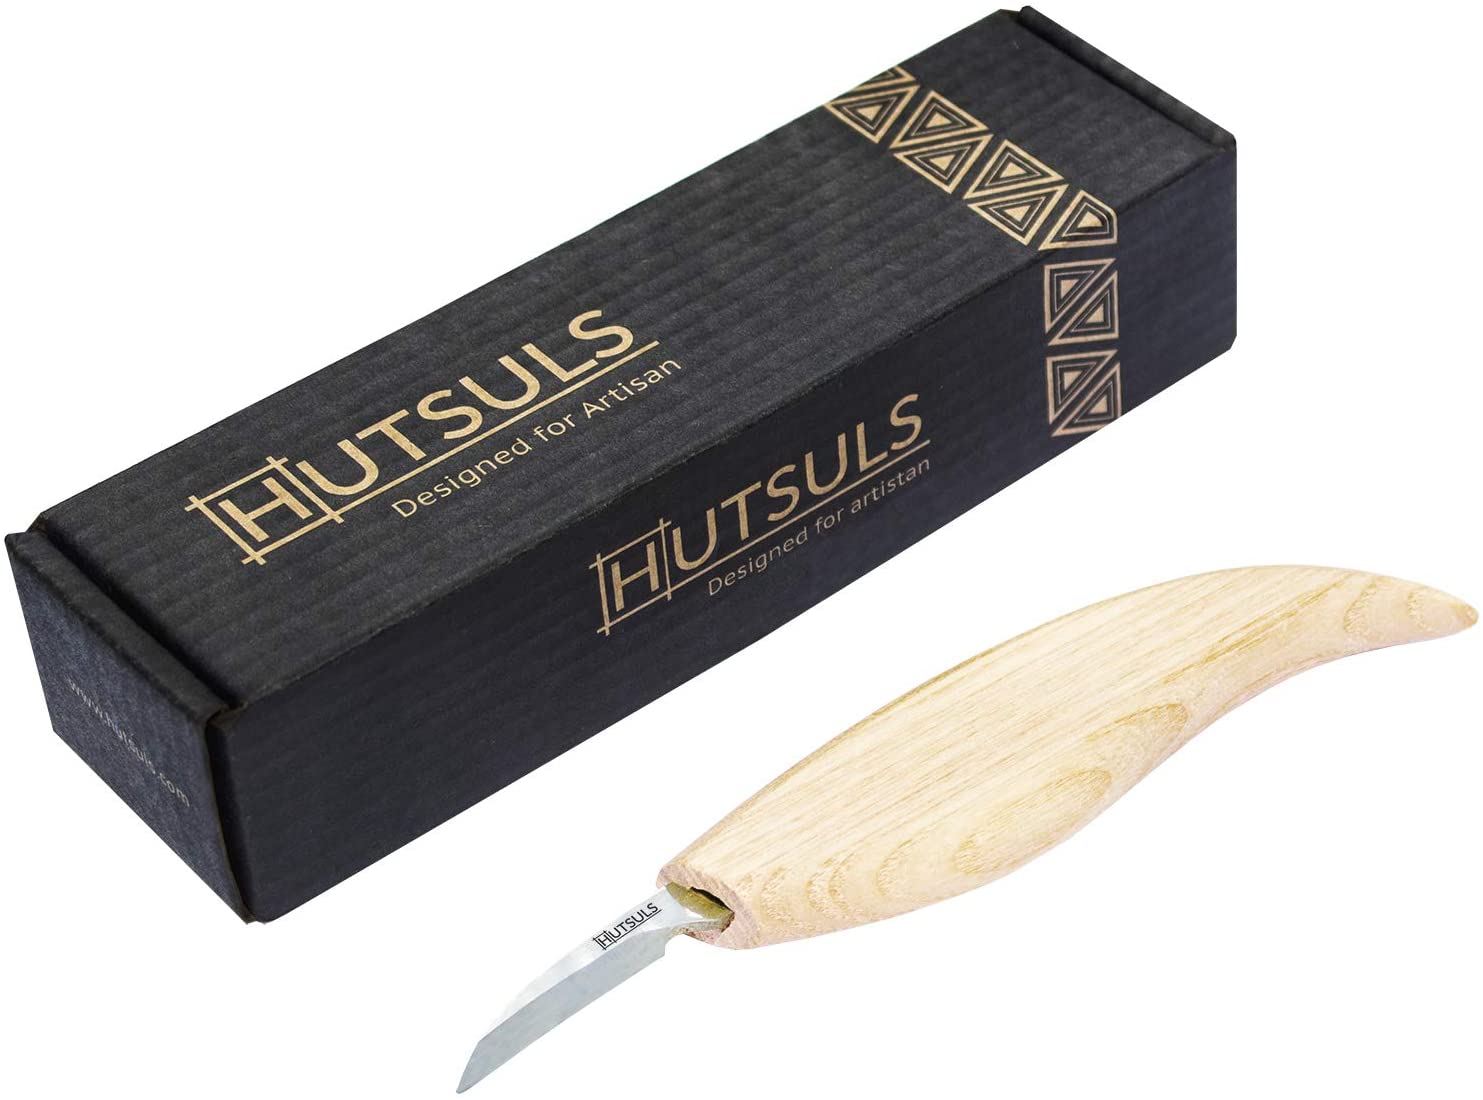 HUTSULS Chip Carving Knife for Beginners